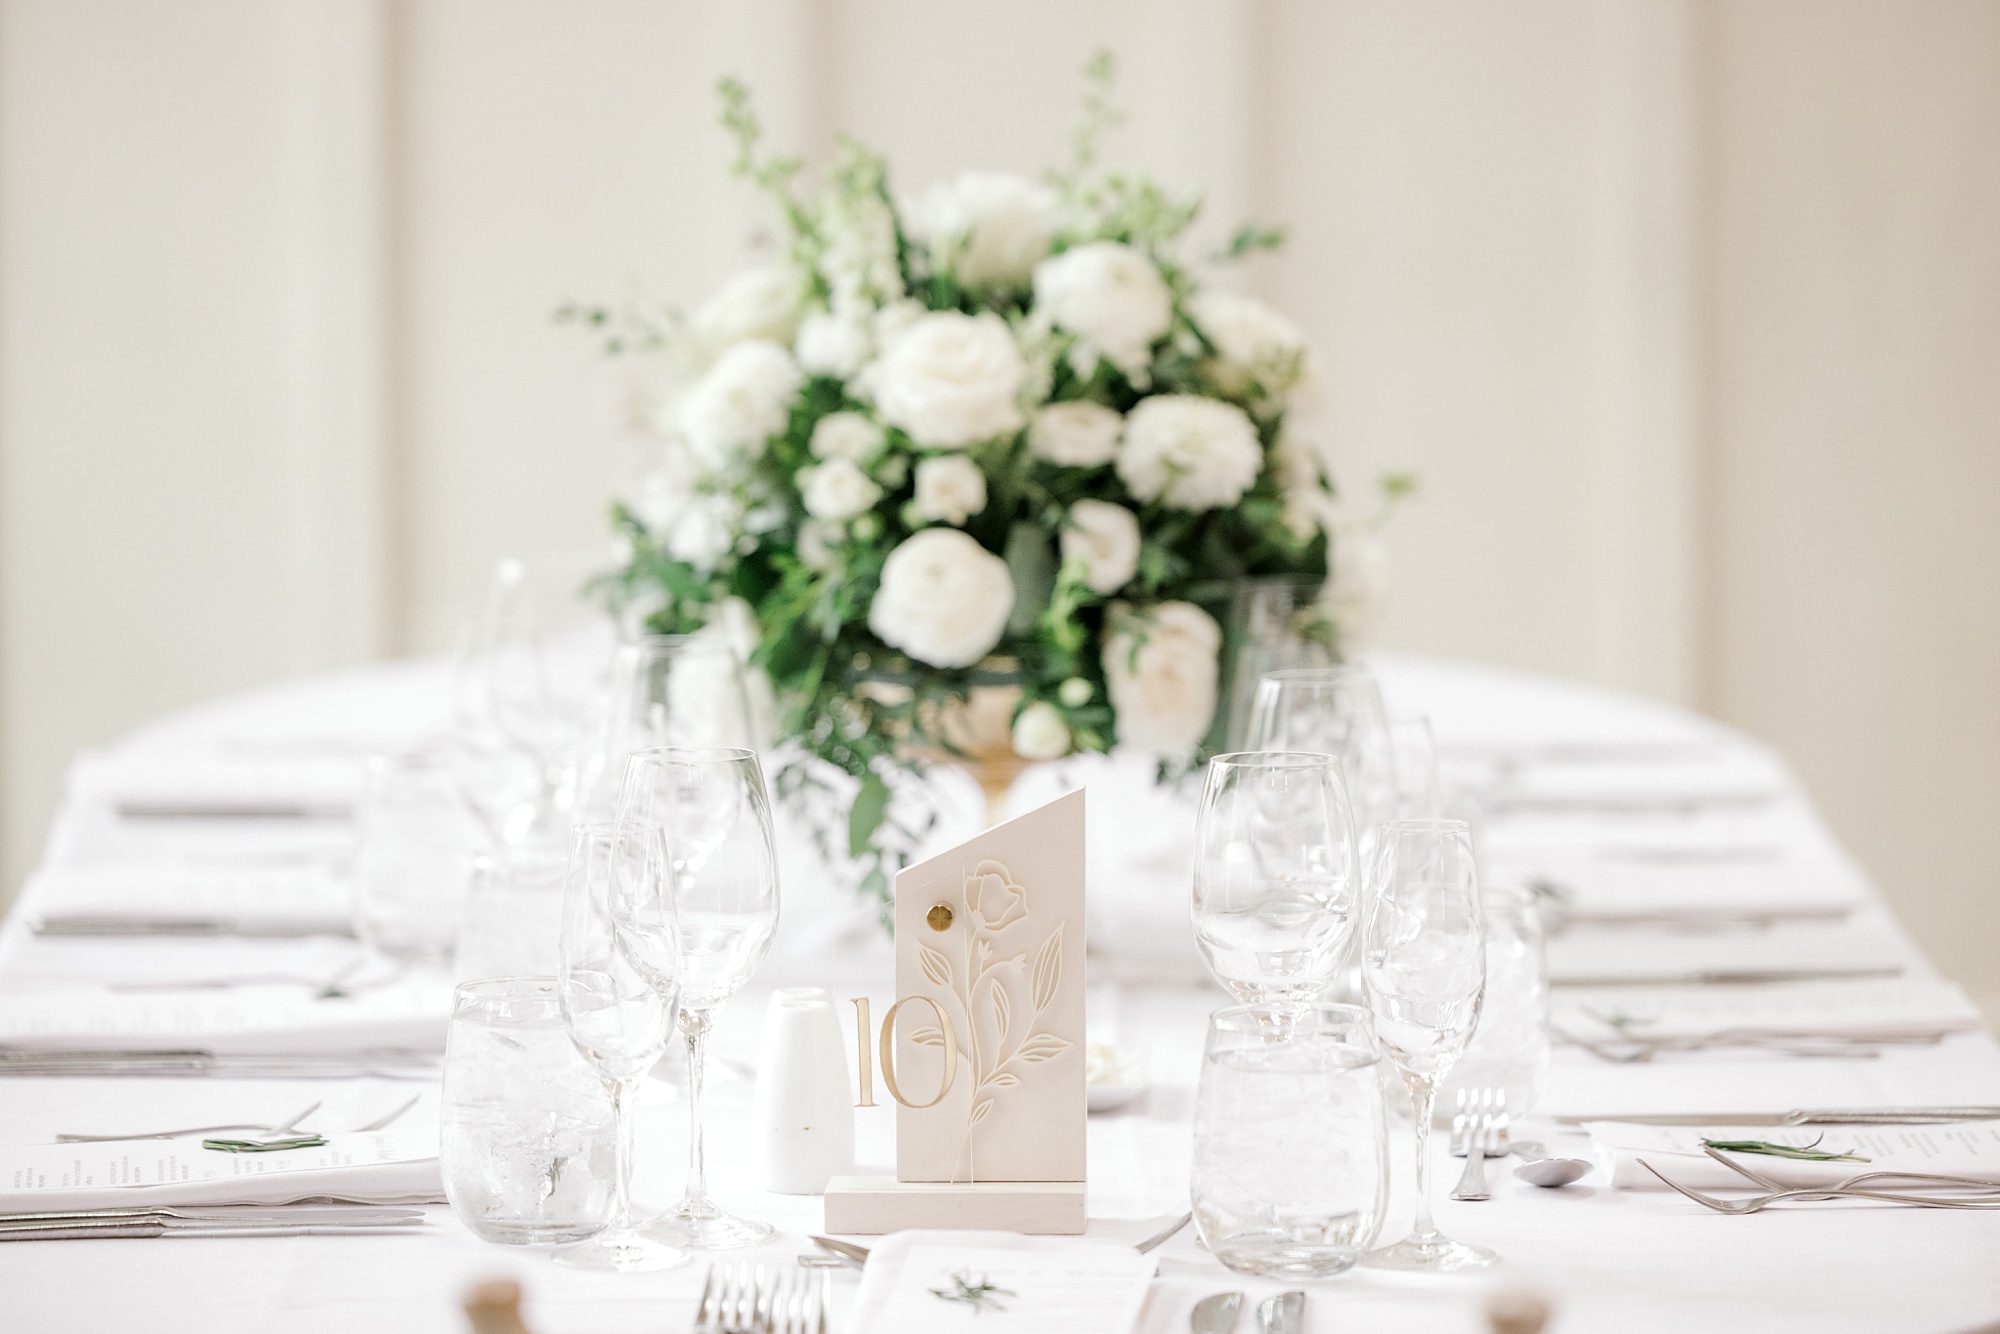 centerpieces with ivory flowers and white place settings for wedding reception at Ryland Inn